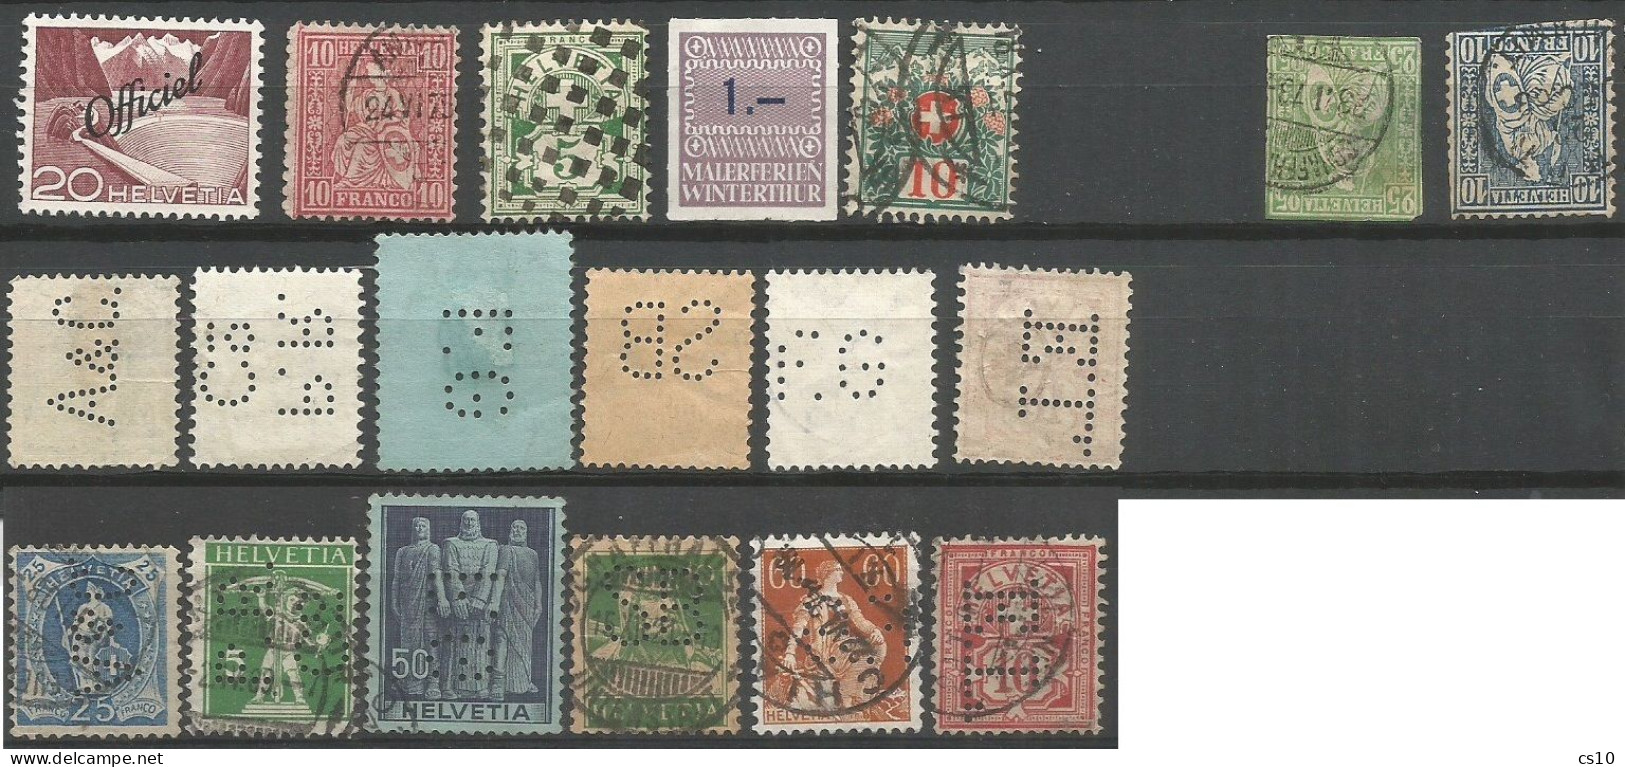 SUISSE Scarce 12 Scans Lot With NON Issued SION 2006 Winter Olympics + Frama Atm Stamps Labels Tete-Beche P.Due Variety - Winter 2006: Torino